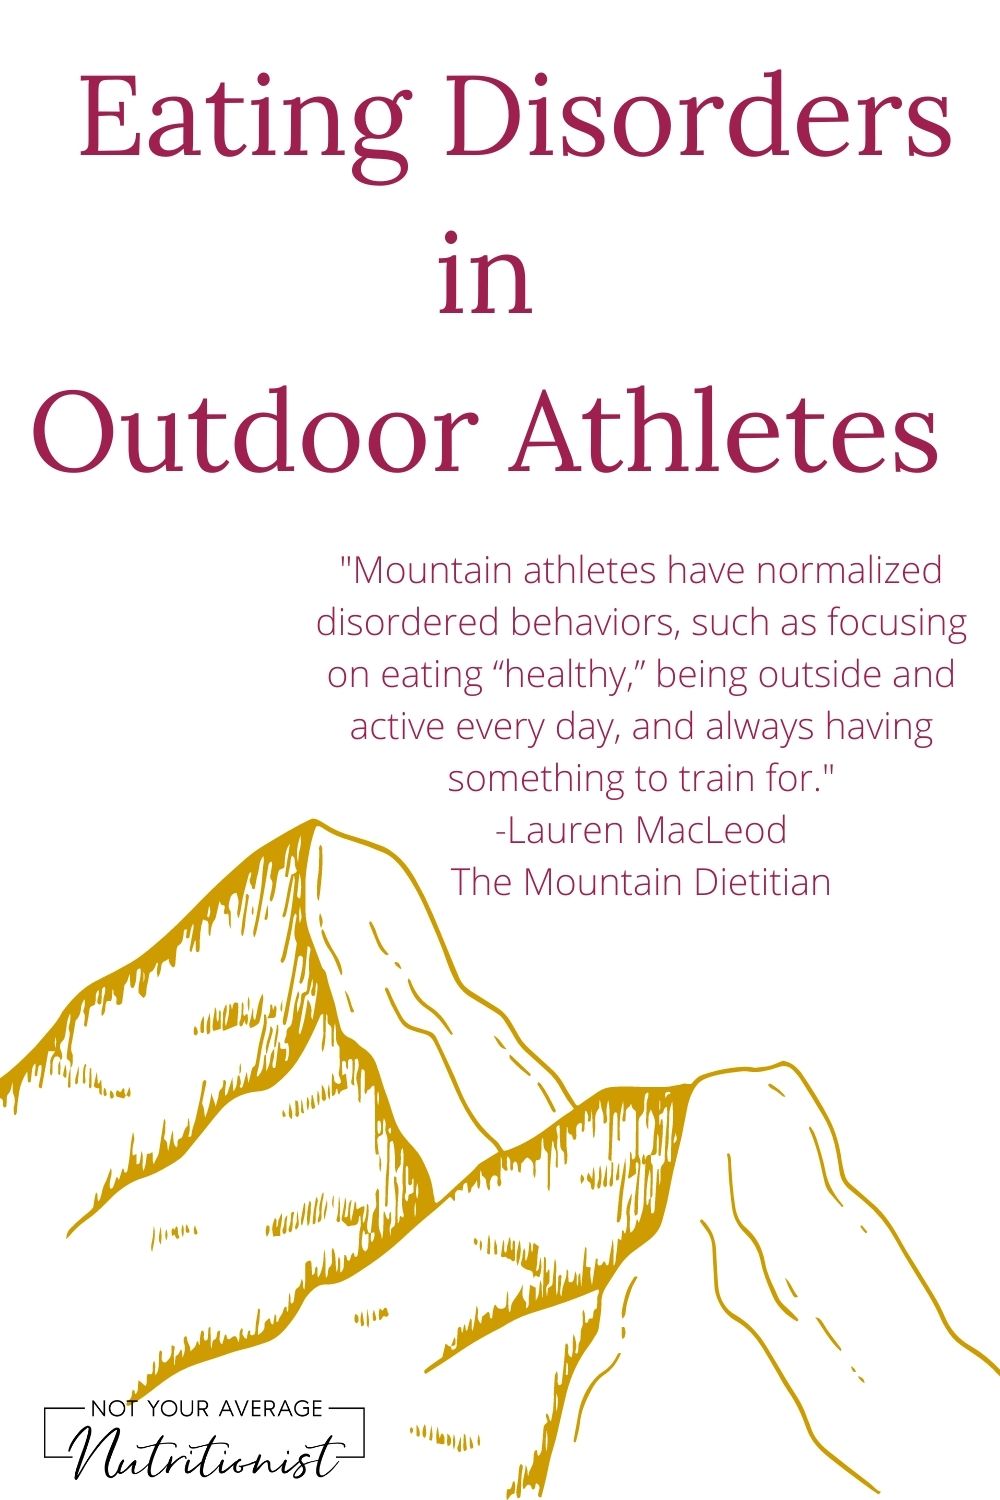 Disordered Eating in the Outdoor Industry: The Mountain Dietitian Lauren MacLeod